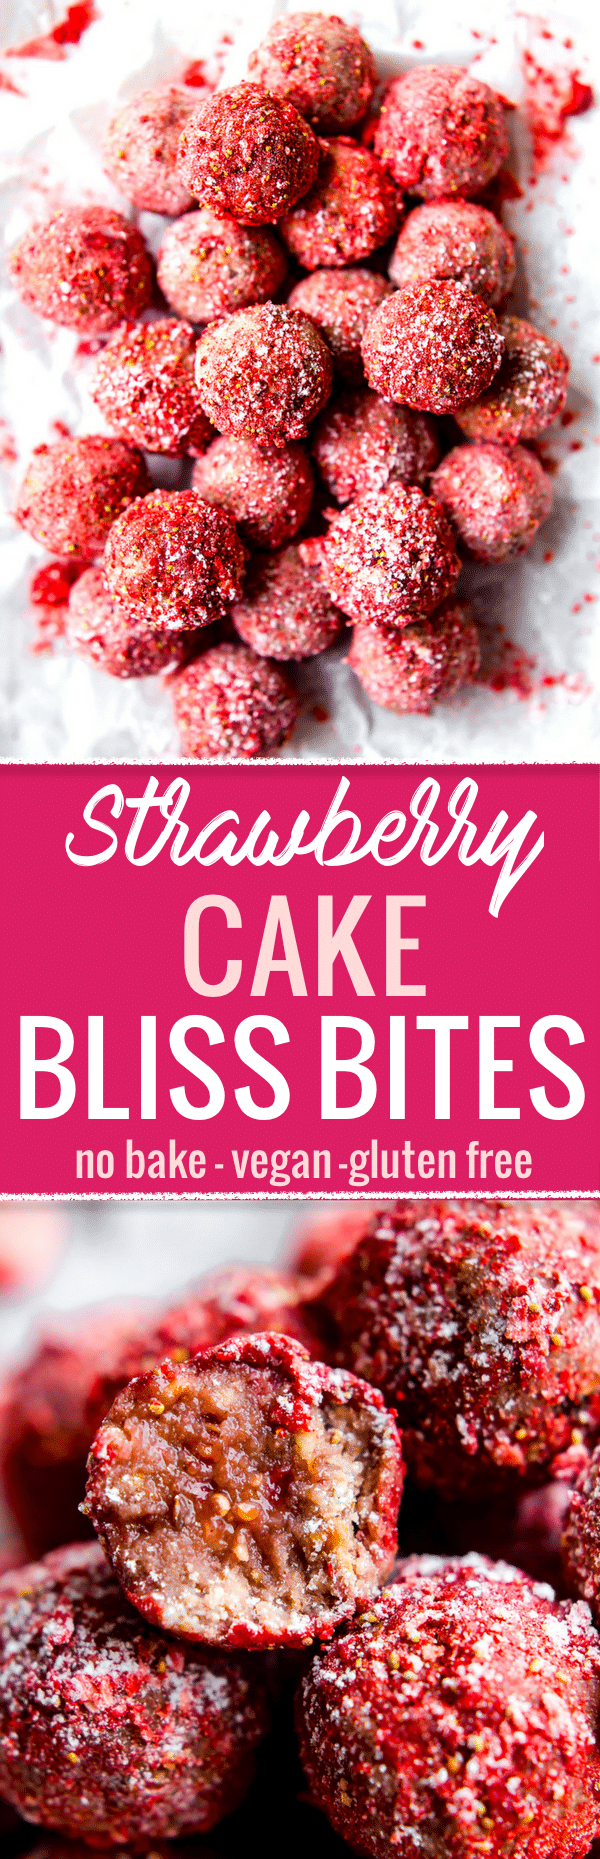 These Vegan No Bake Strawberry Cake Bliss Bites are the bite size healthy dessert. Just dried Strawberries, cashew cream, gluten free granola/flour, and a sweet jam filling! Tart and tasty! A vegan cake bite that requires no baking, just blissfully nourishing. Paleo friendly. www.cottercrunch.com